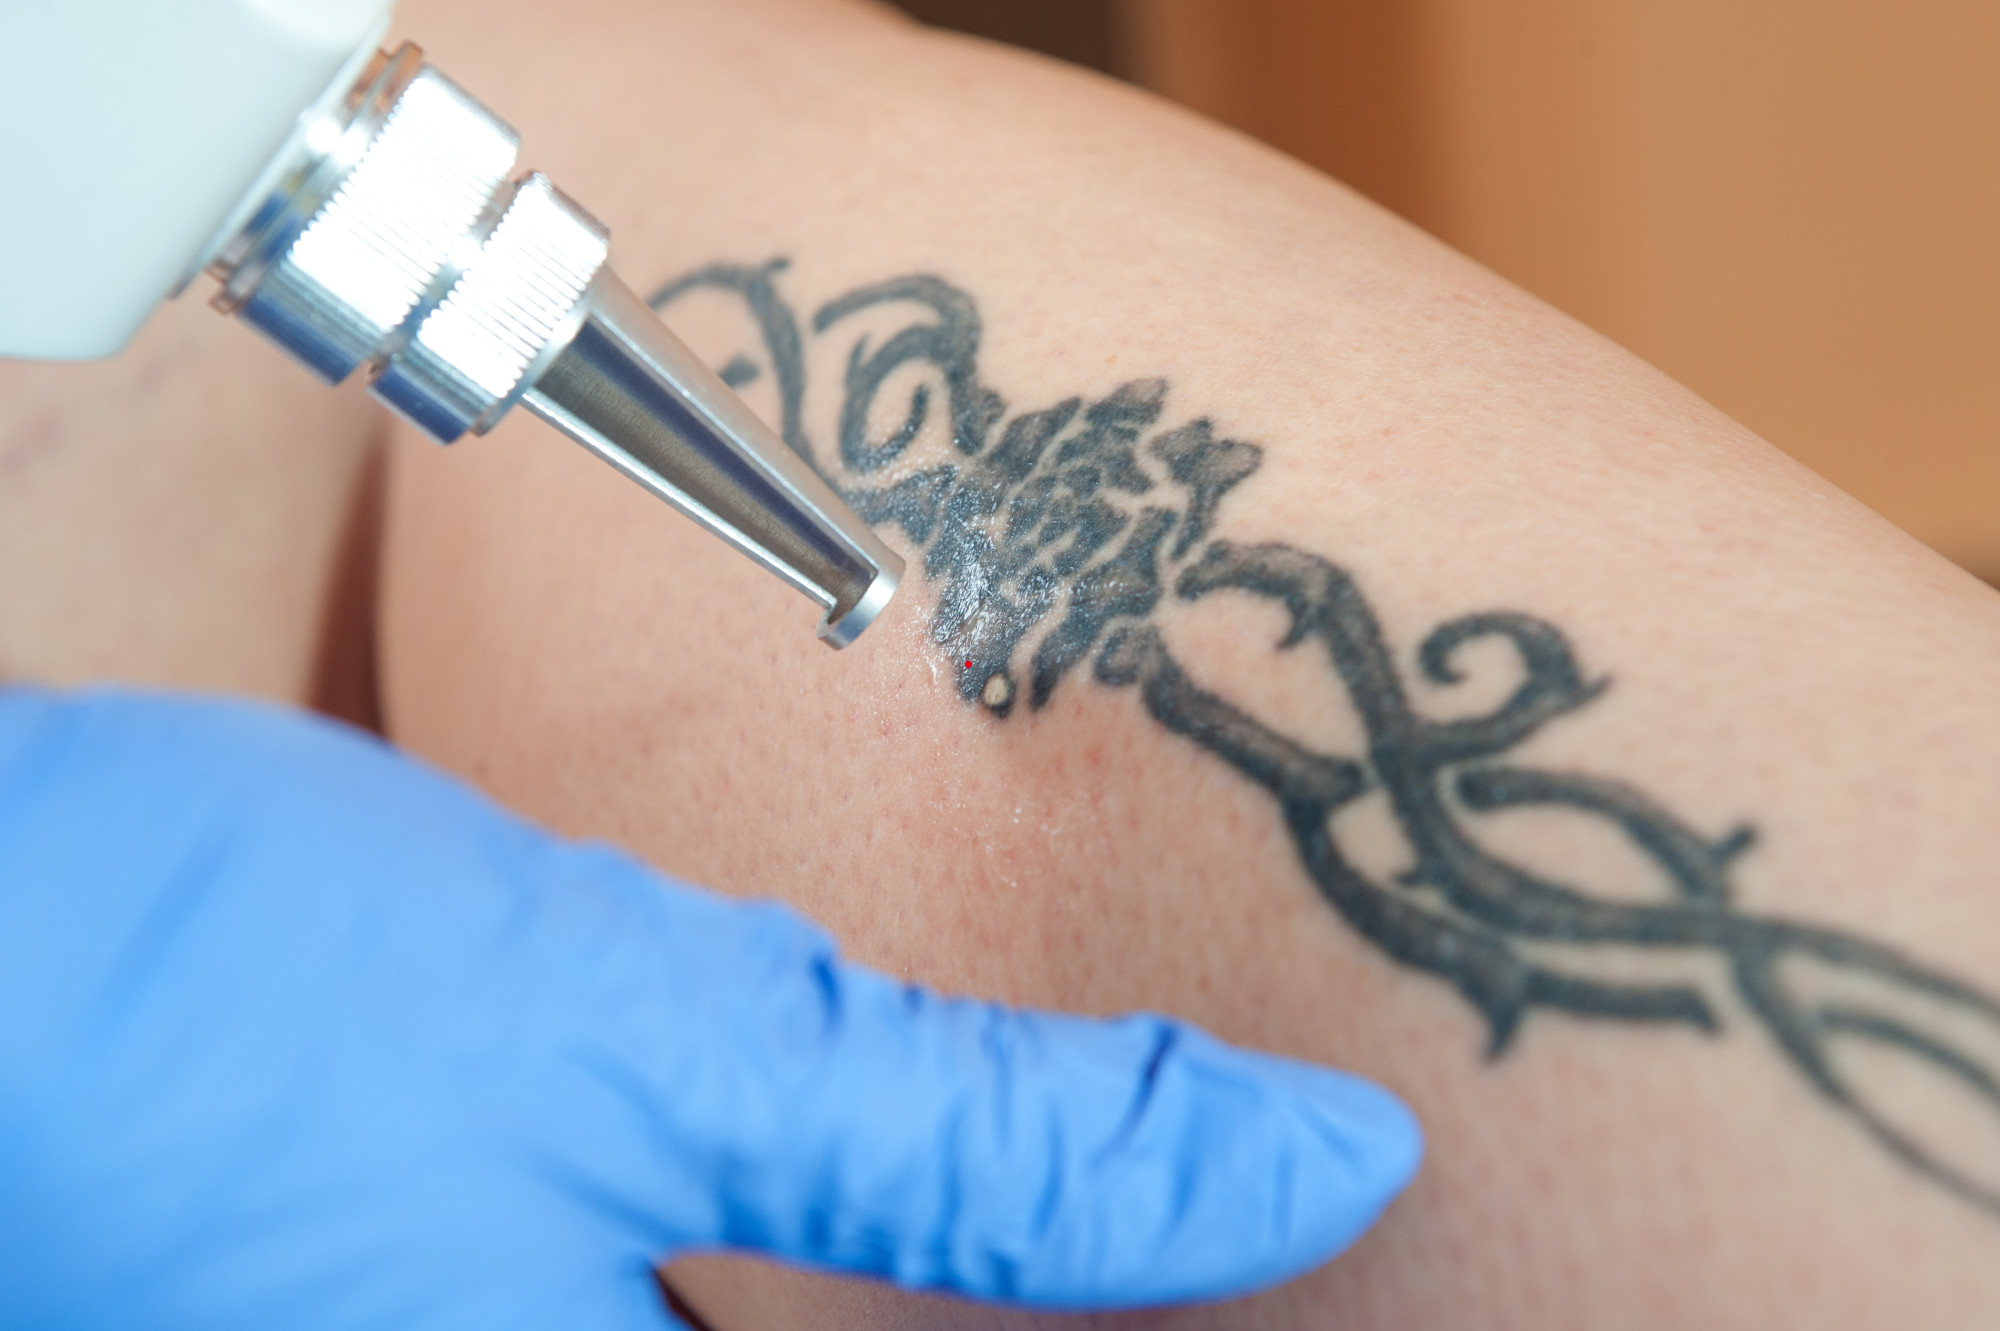 Tattoo Removal Methods: What Works?